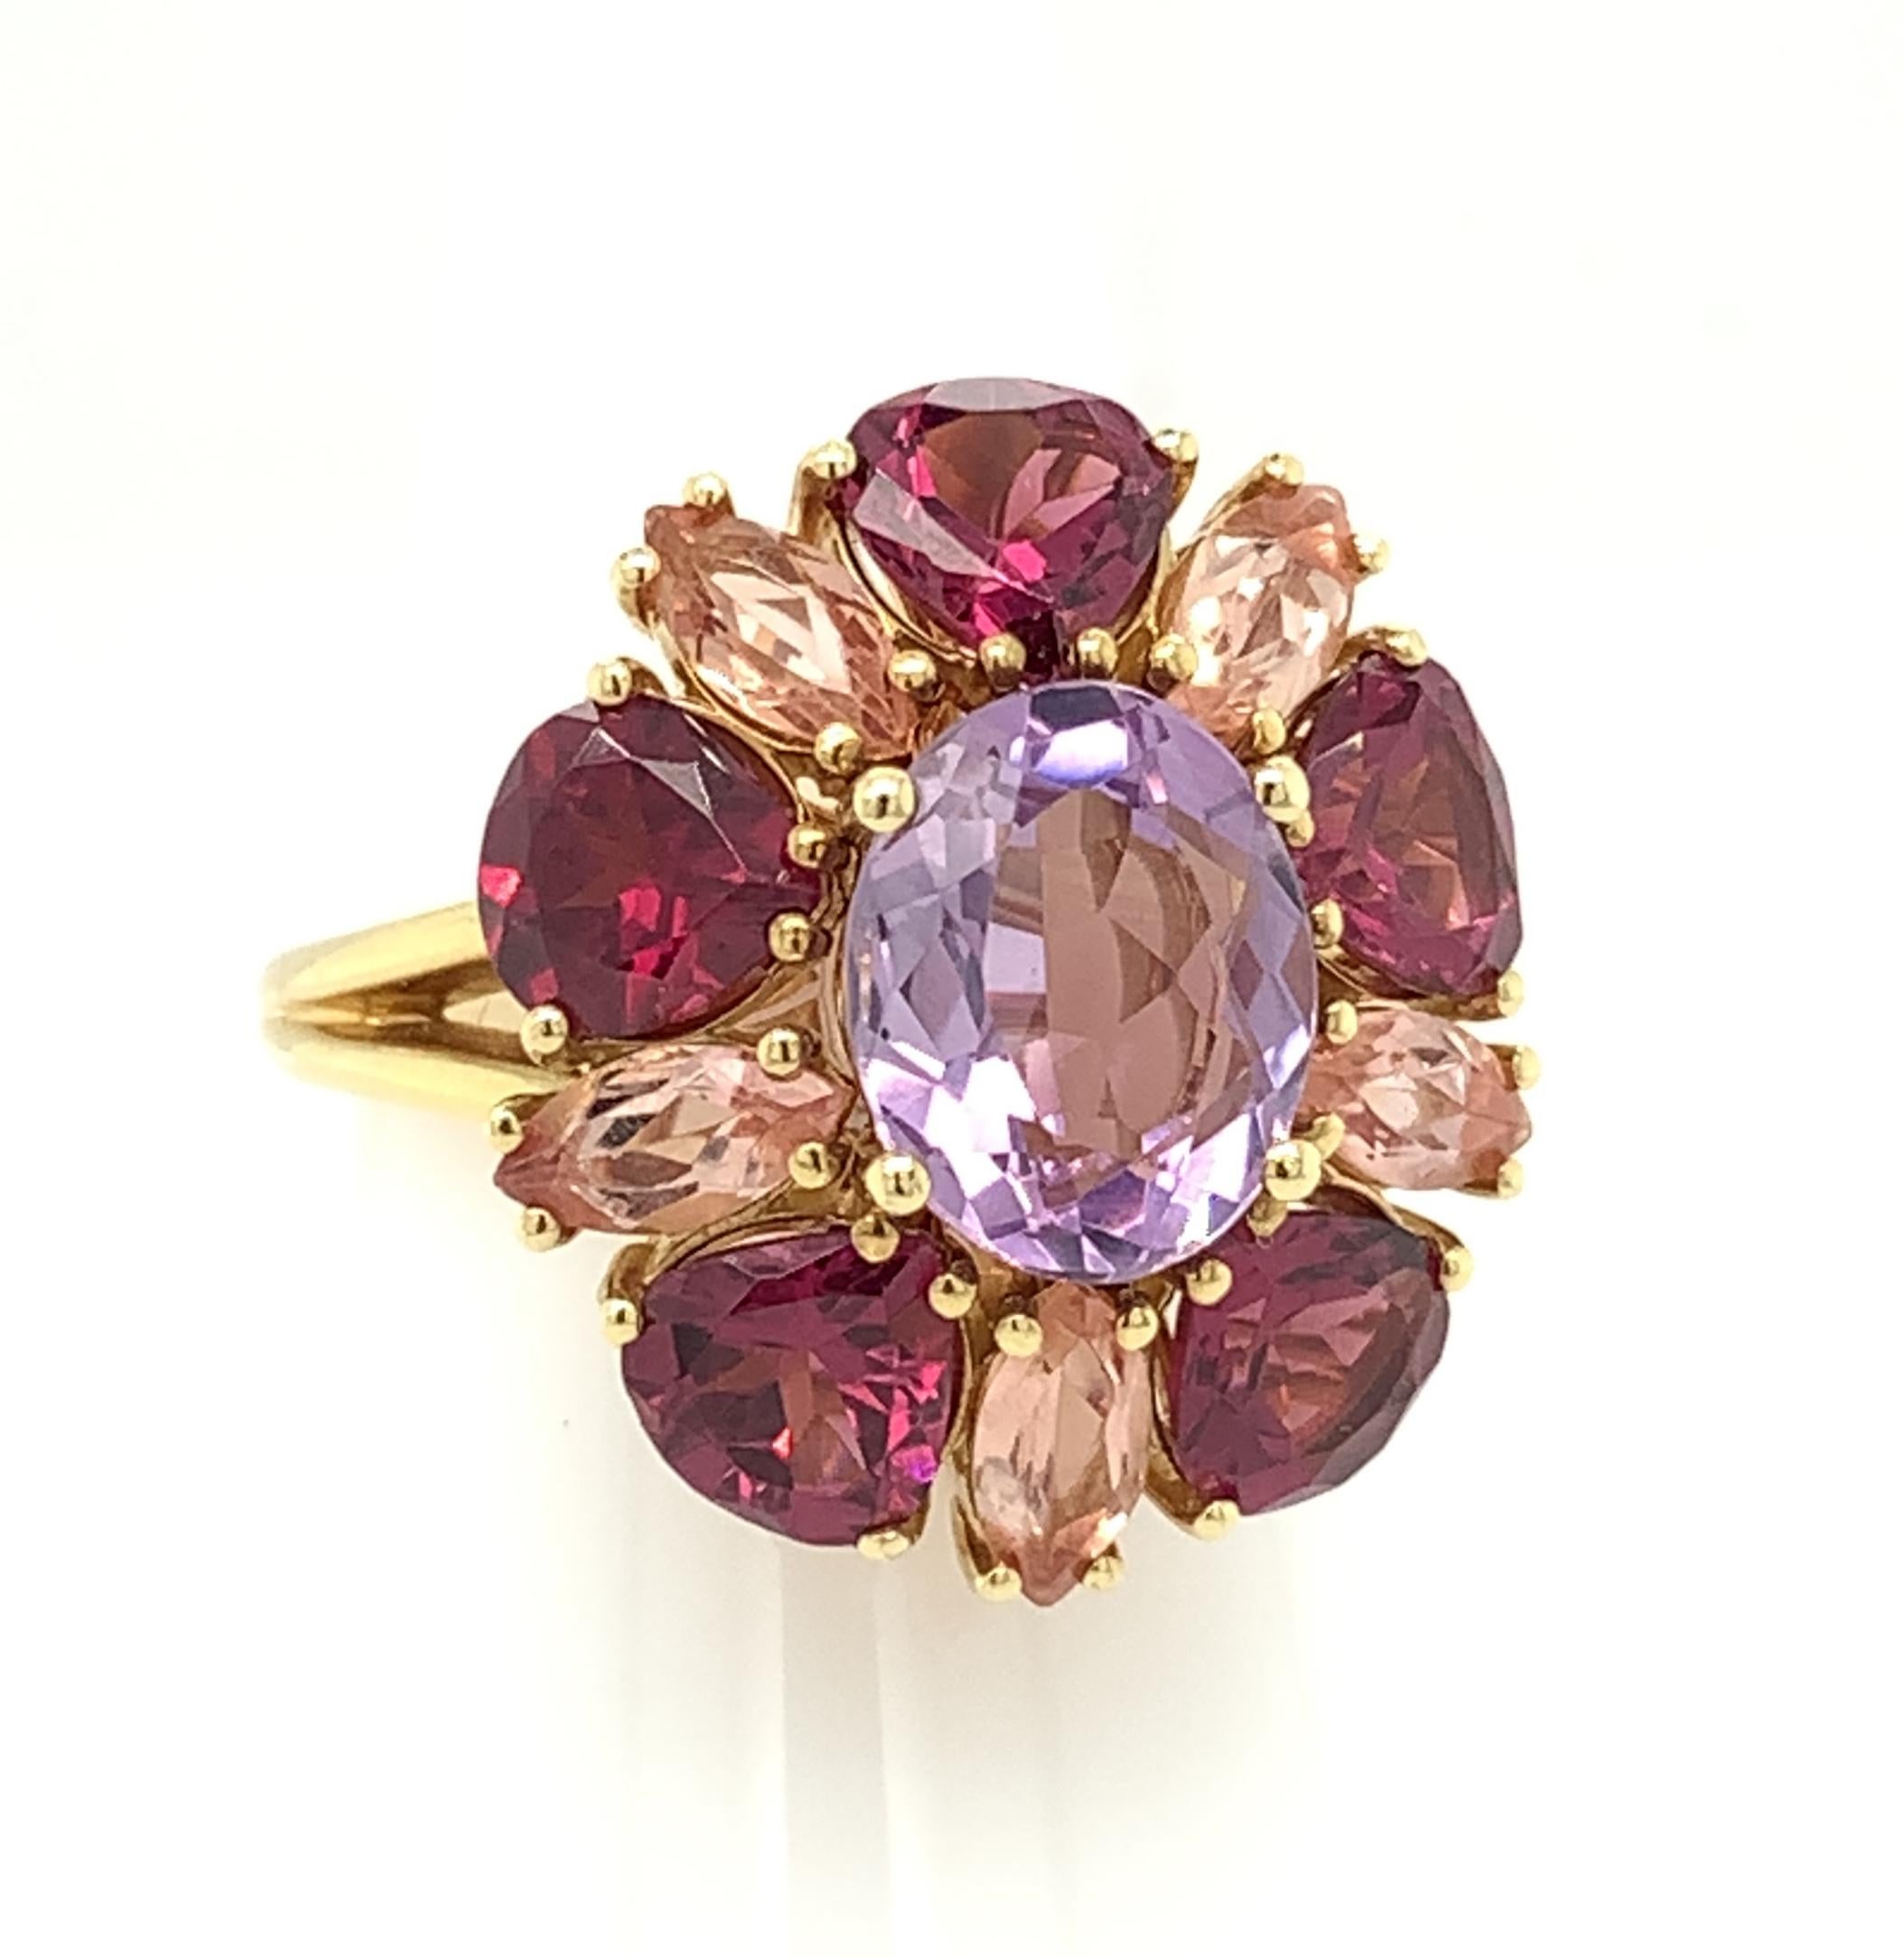 This blooming multicolor ring combines an elegant shade of crystalline amethyst with vibrant rhodolite garnets and coral-colored precious topaz! “Rose de France” is the name given to this particular color of amethyst, making it the perfect center